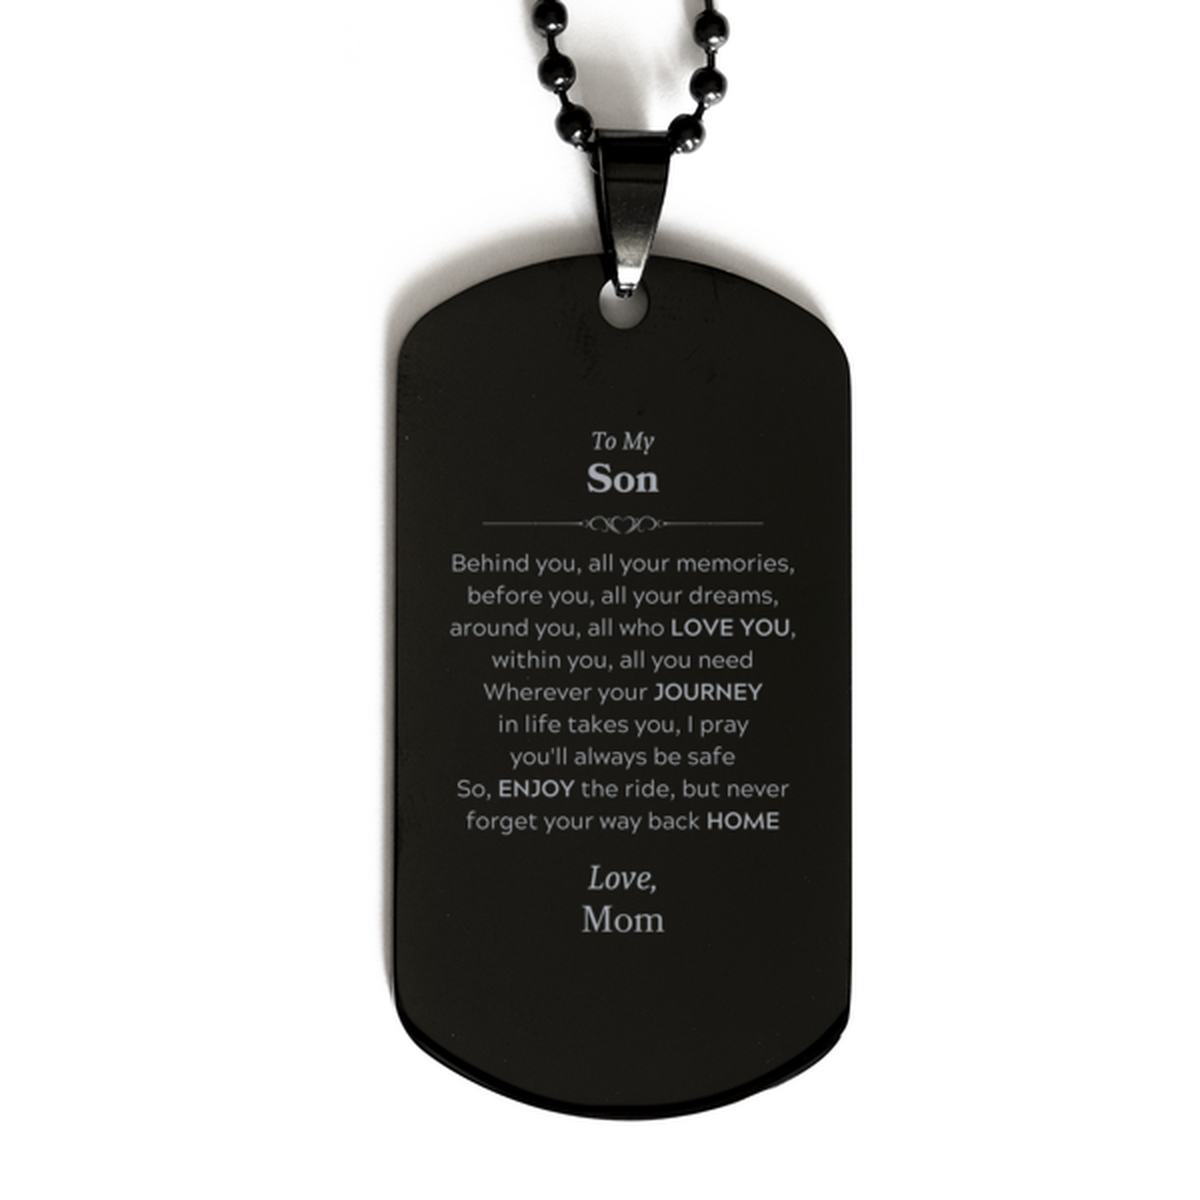 To My Son Graduation Gifts from Mom, Son Black Dog Tag Christmas Birthday Gifts for Son Behind you, all your memories, before you, all your dreams. Love, Mom